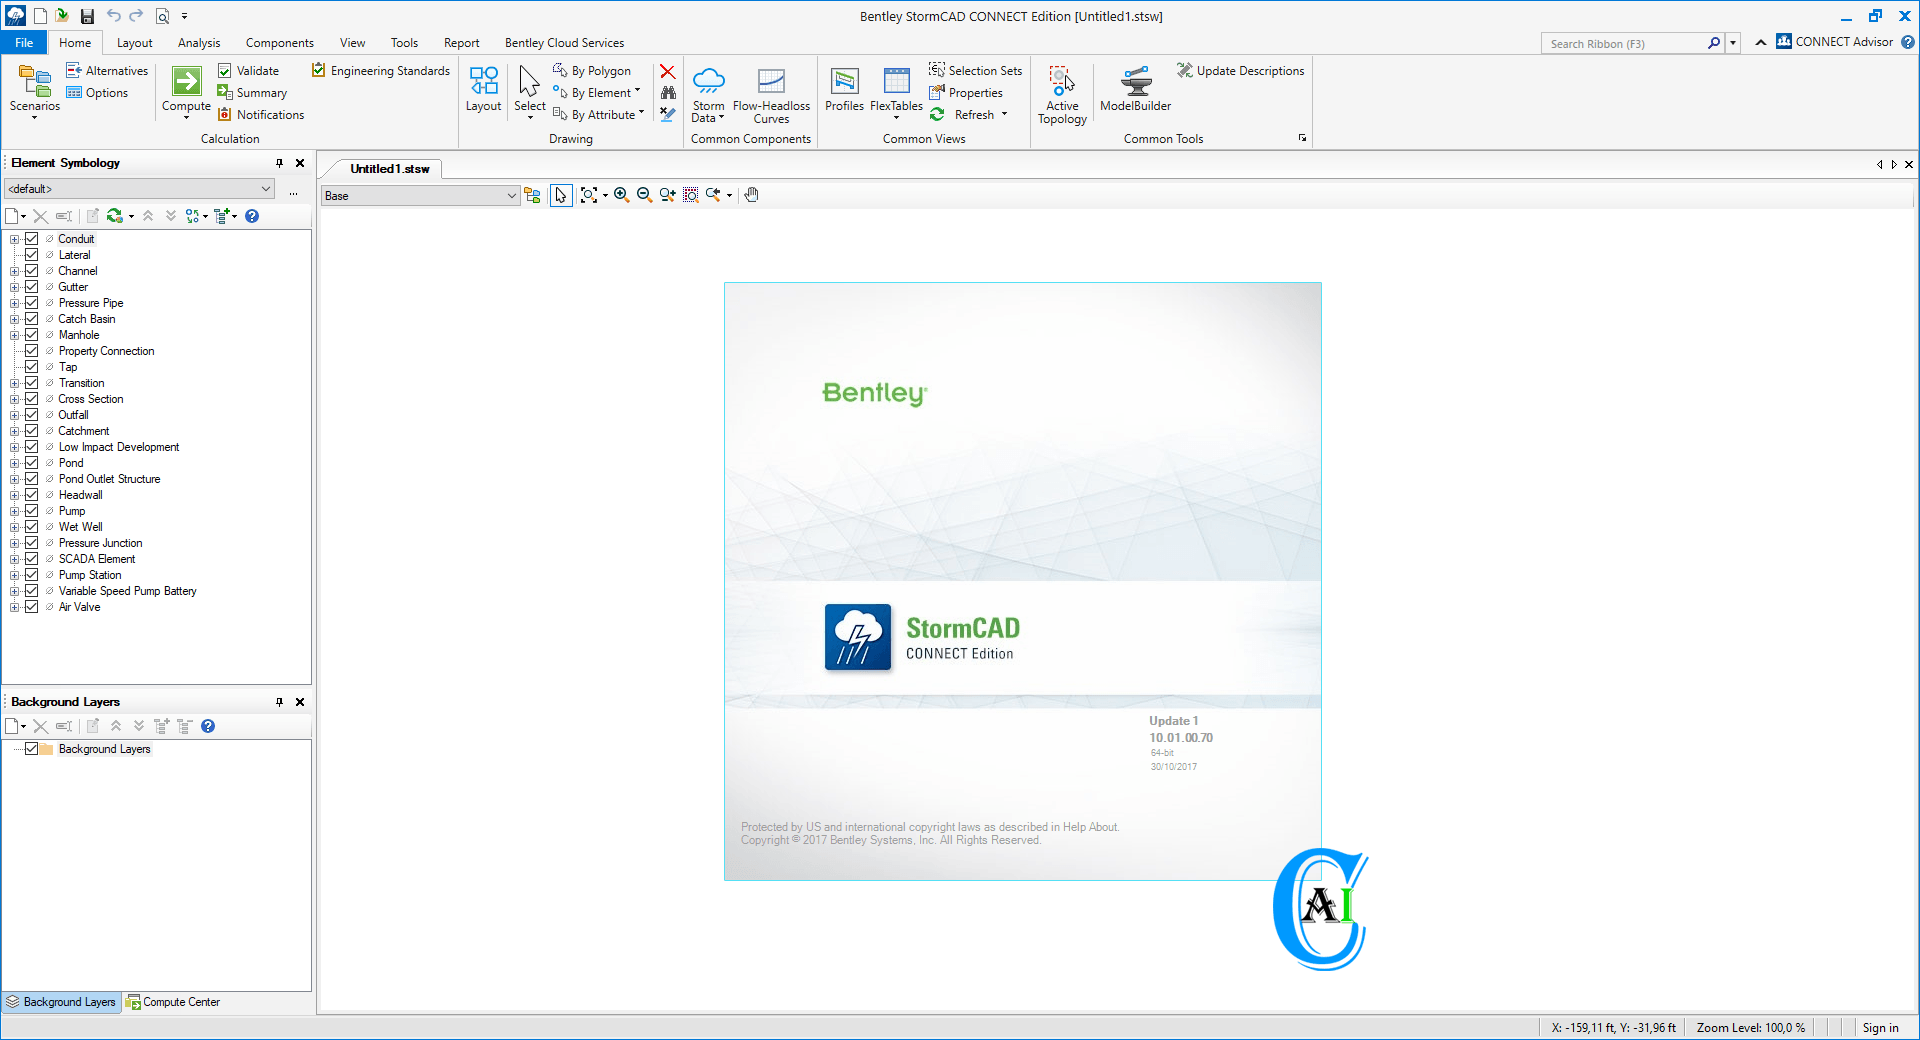 Working with Bentley StormCAD CONNECT Edition 10 full license